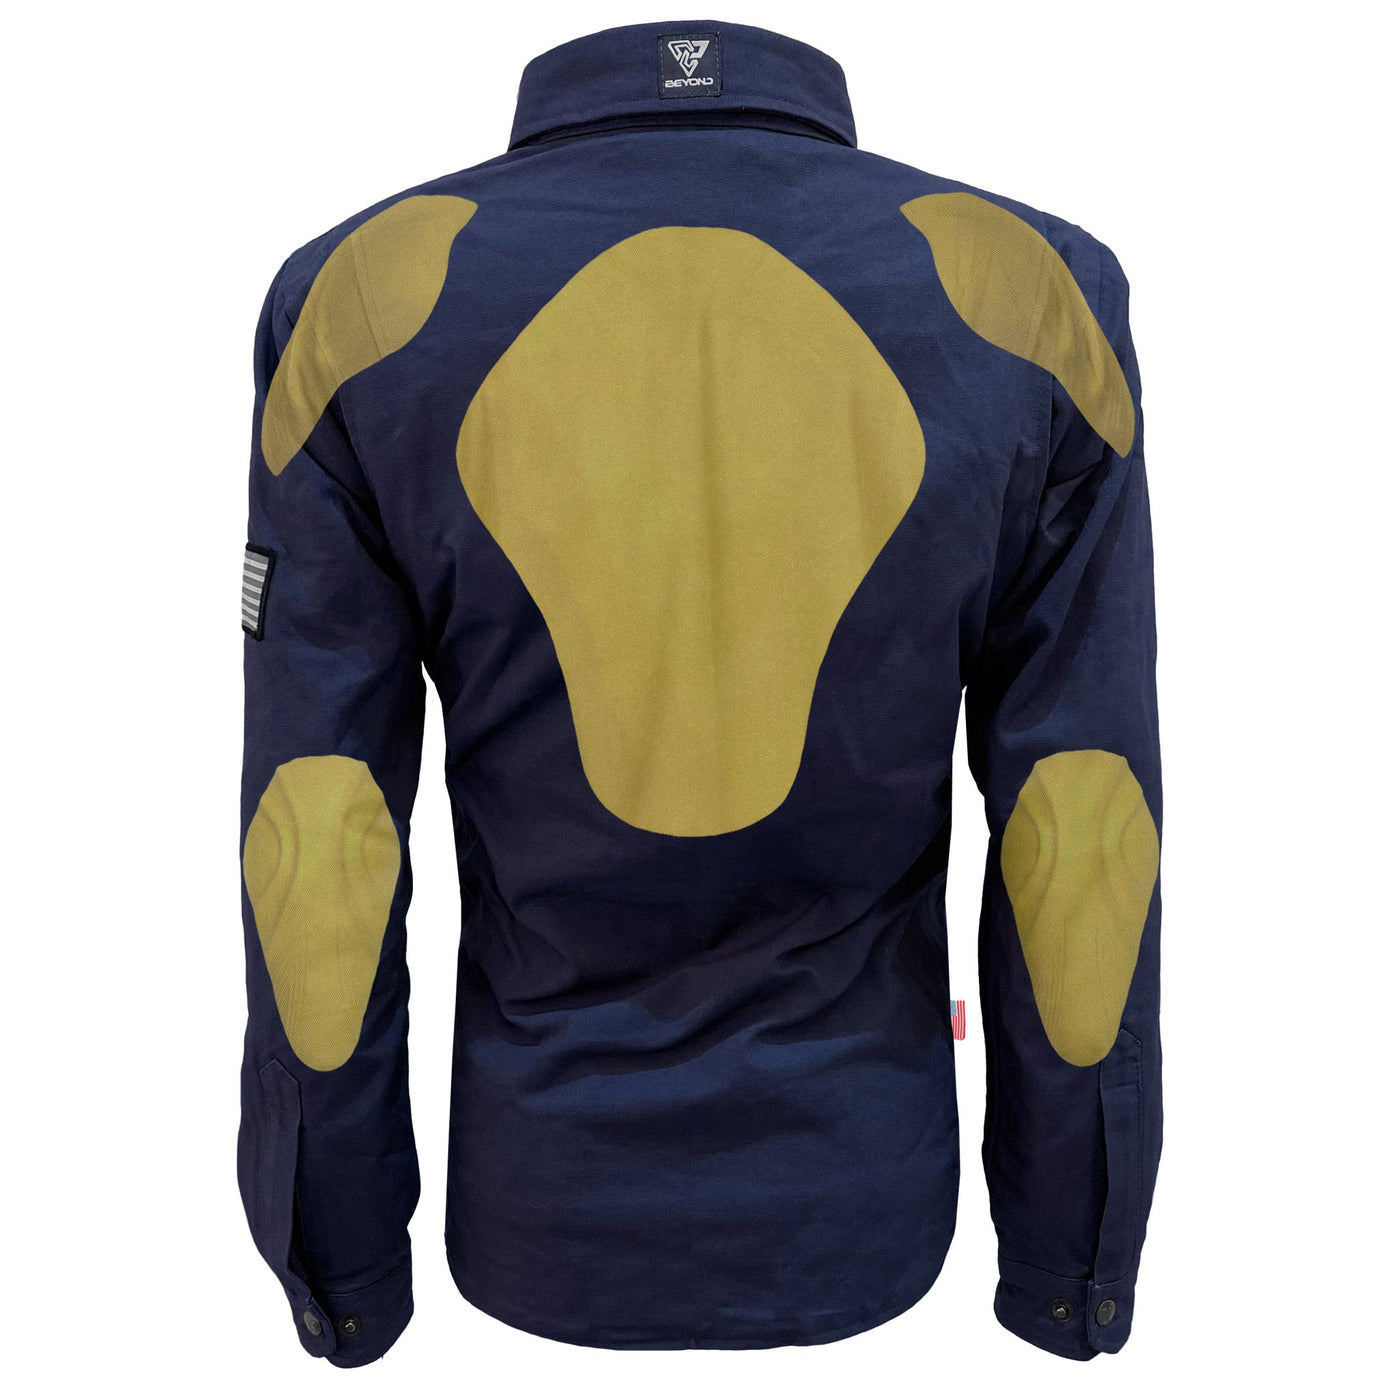 Protective Canvas Jacket with Pads for Women - Navy Blue